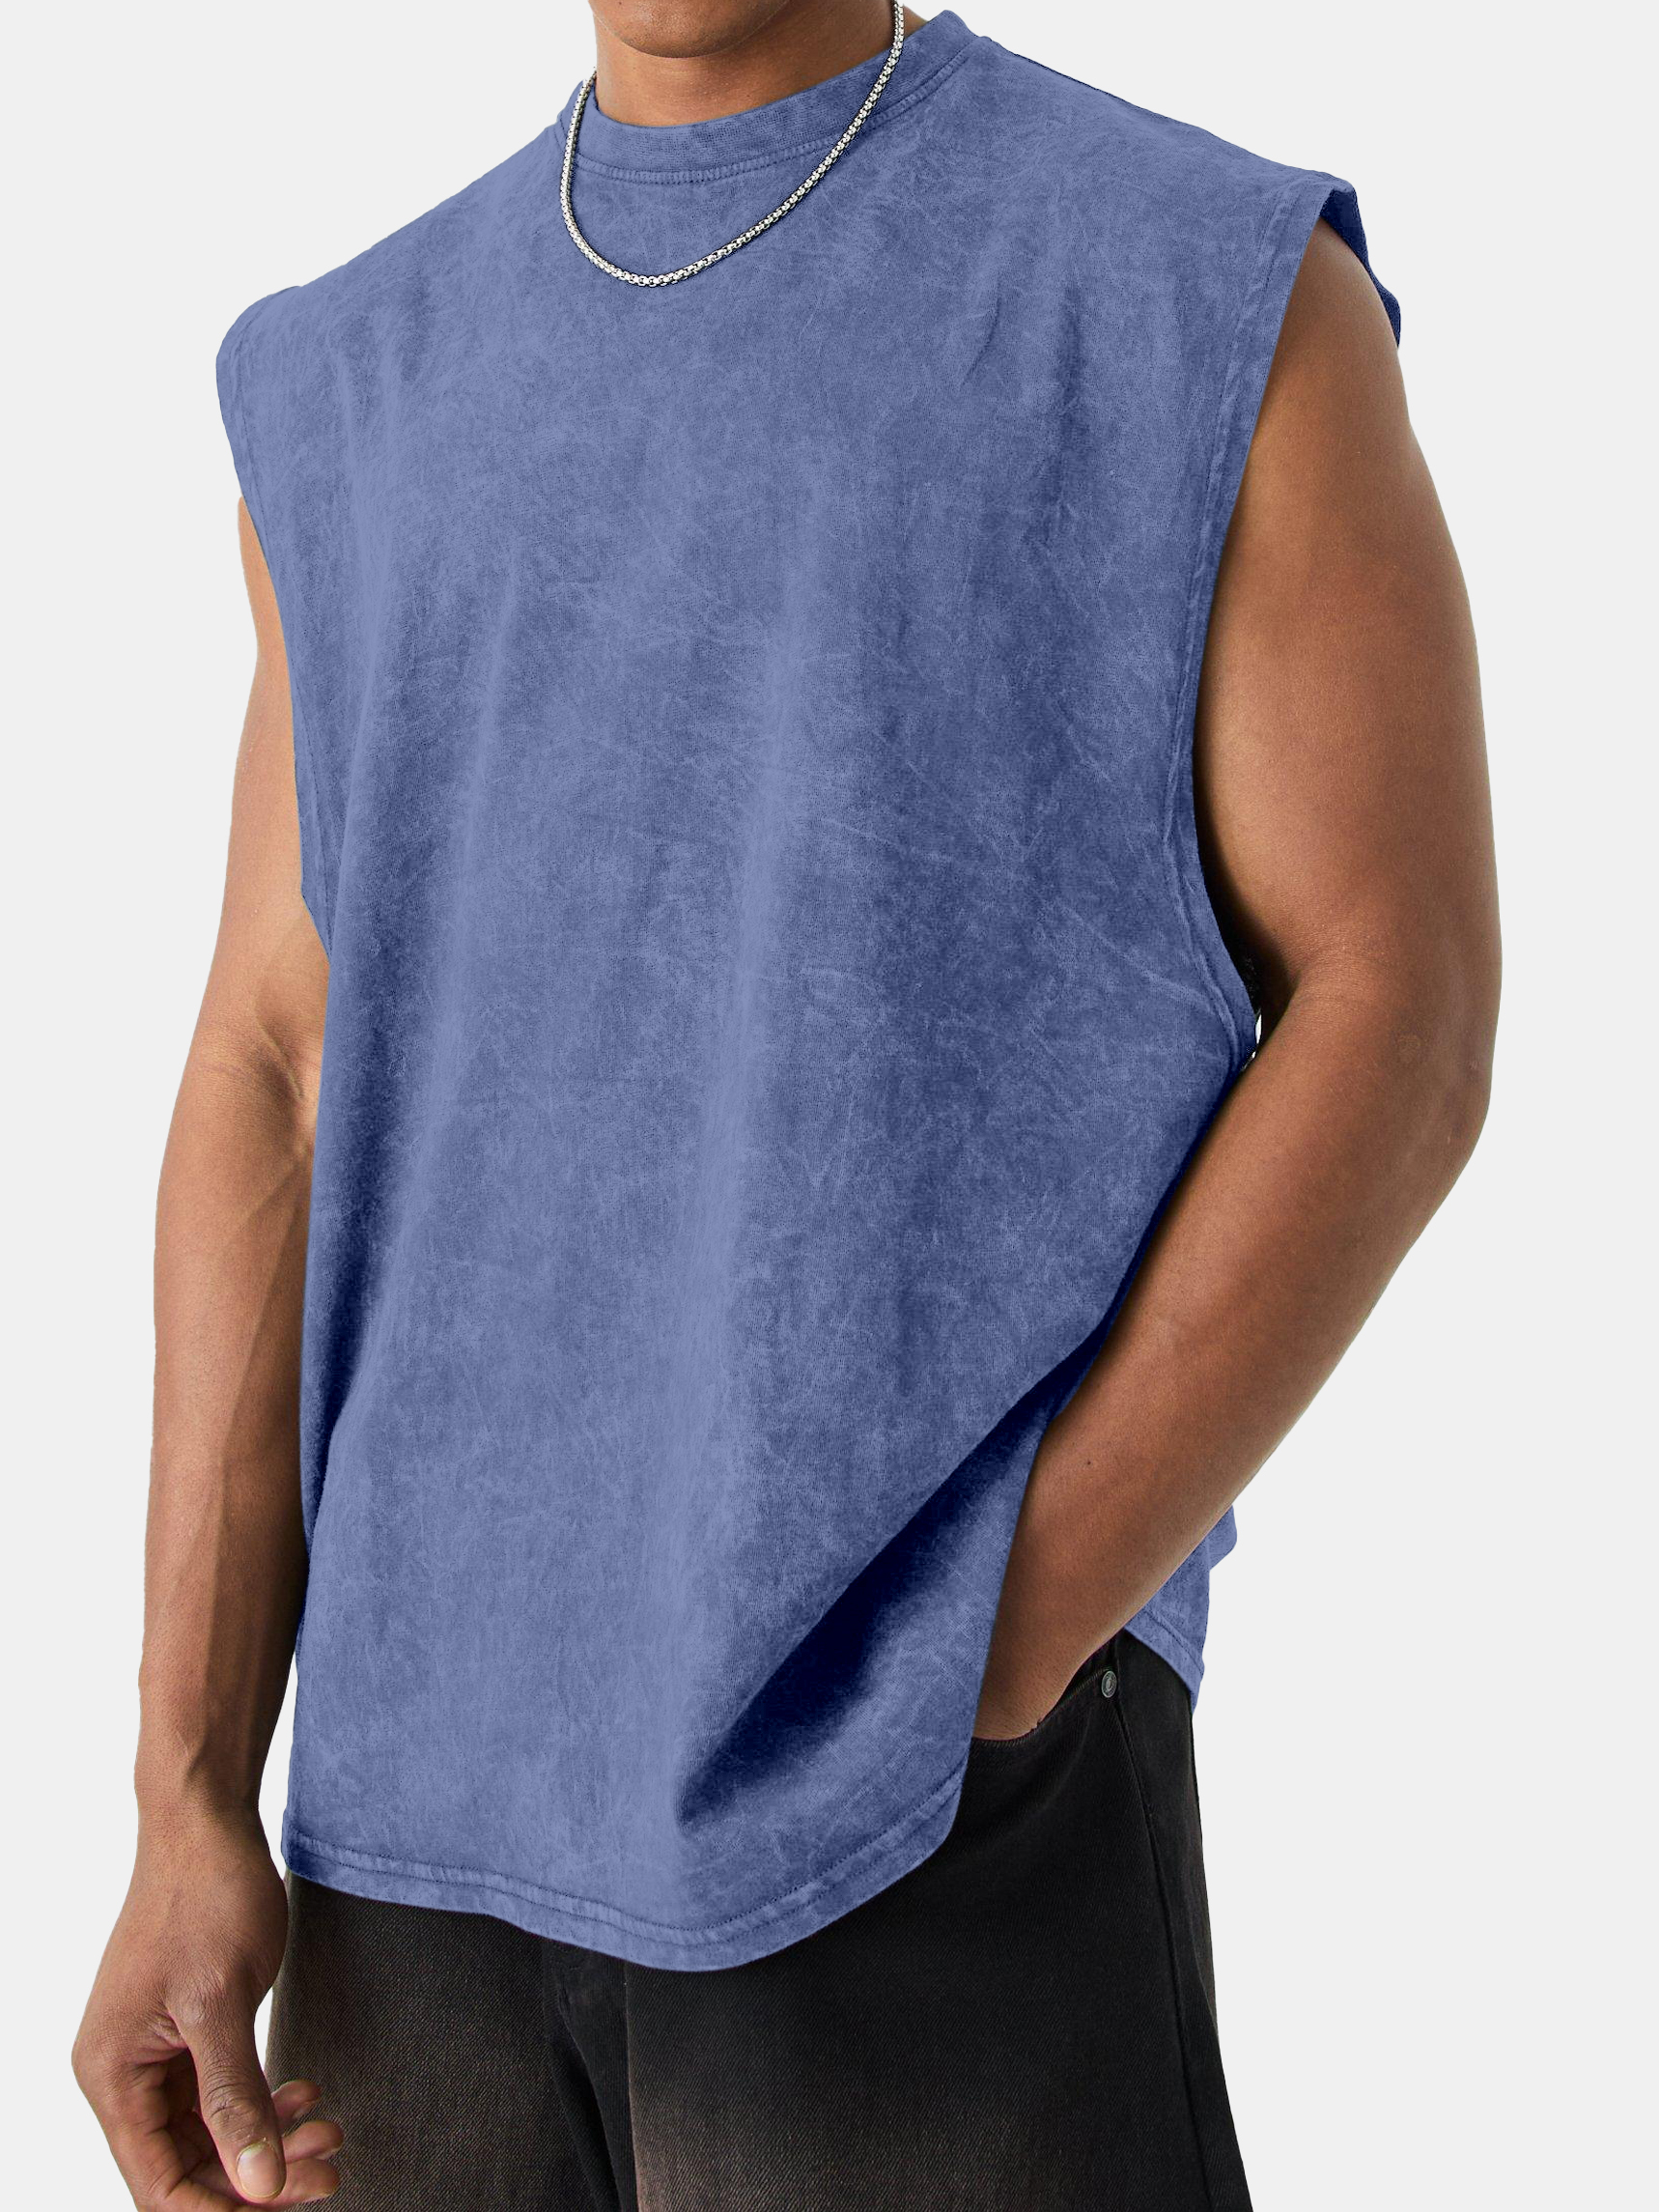 Men's Vintage Washed Solid Color Comfortable Sleeveless T-shirt